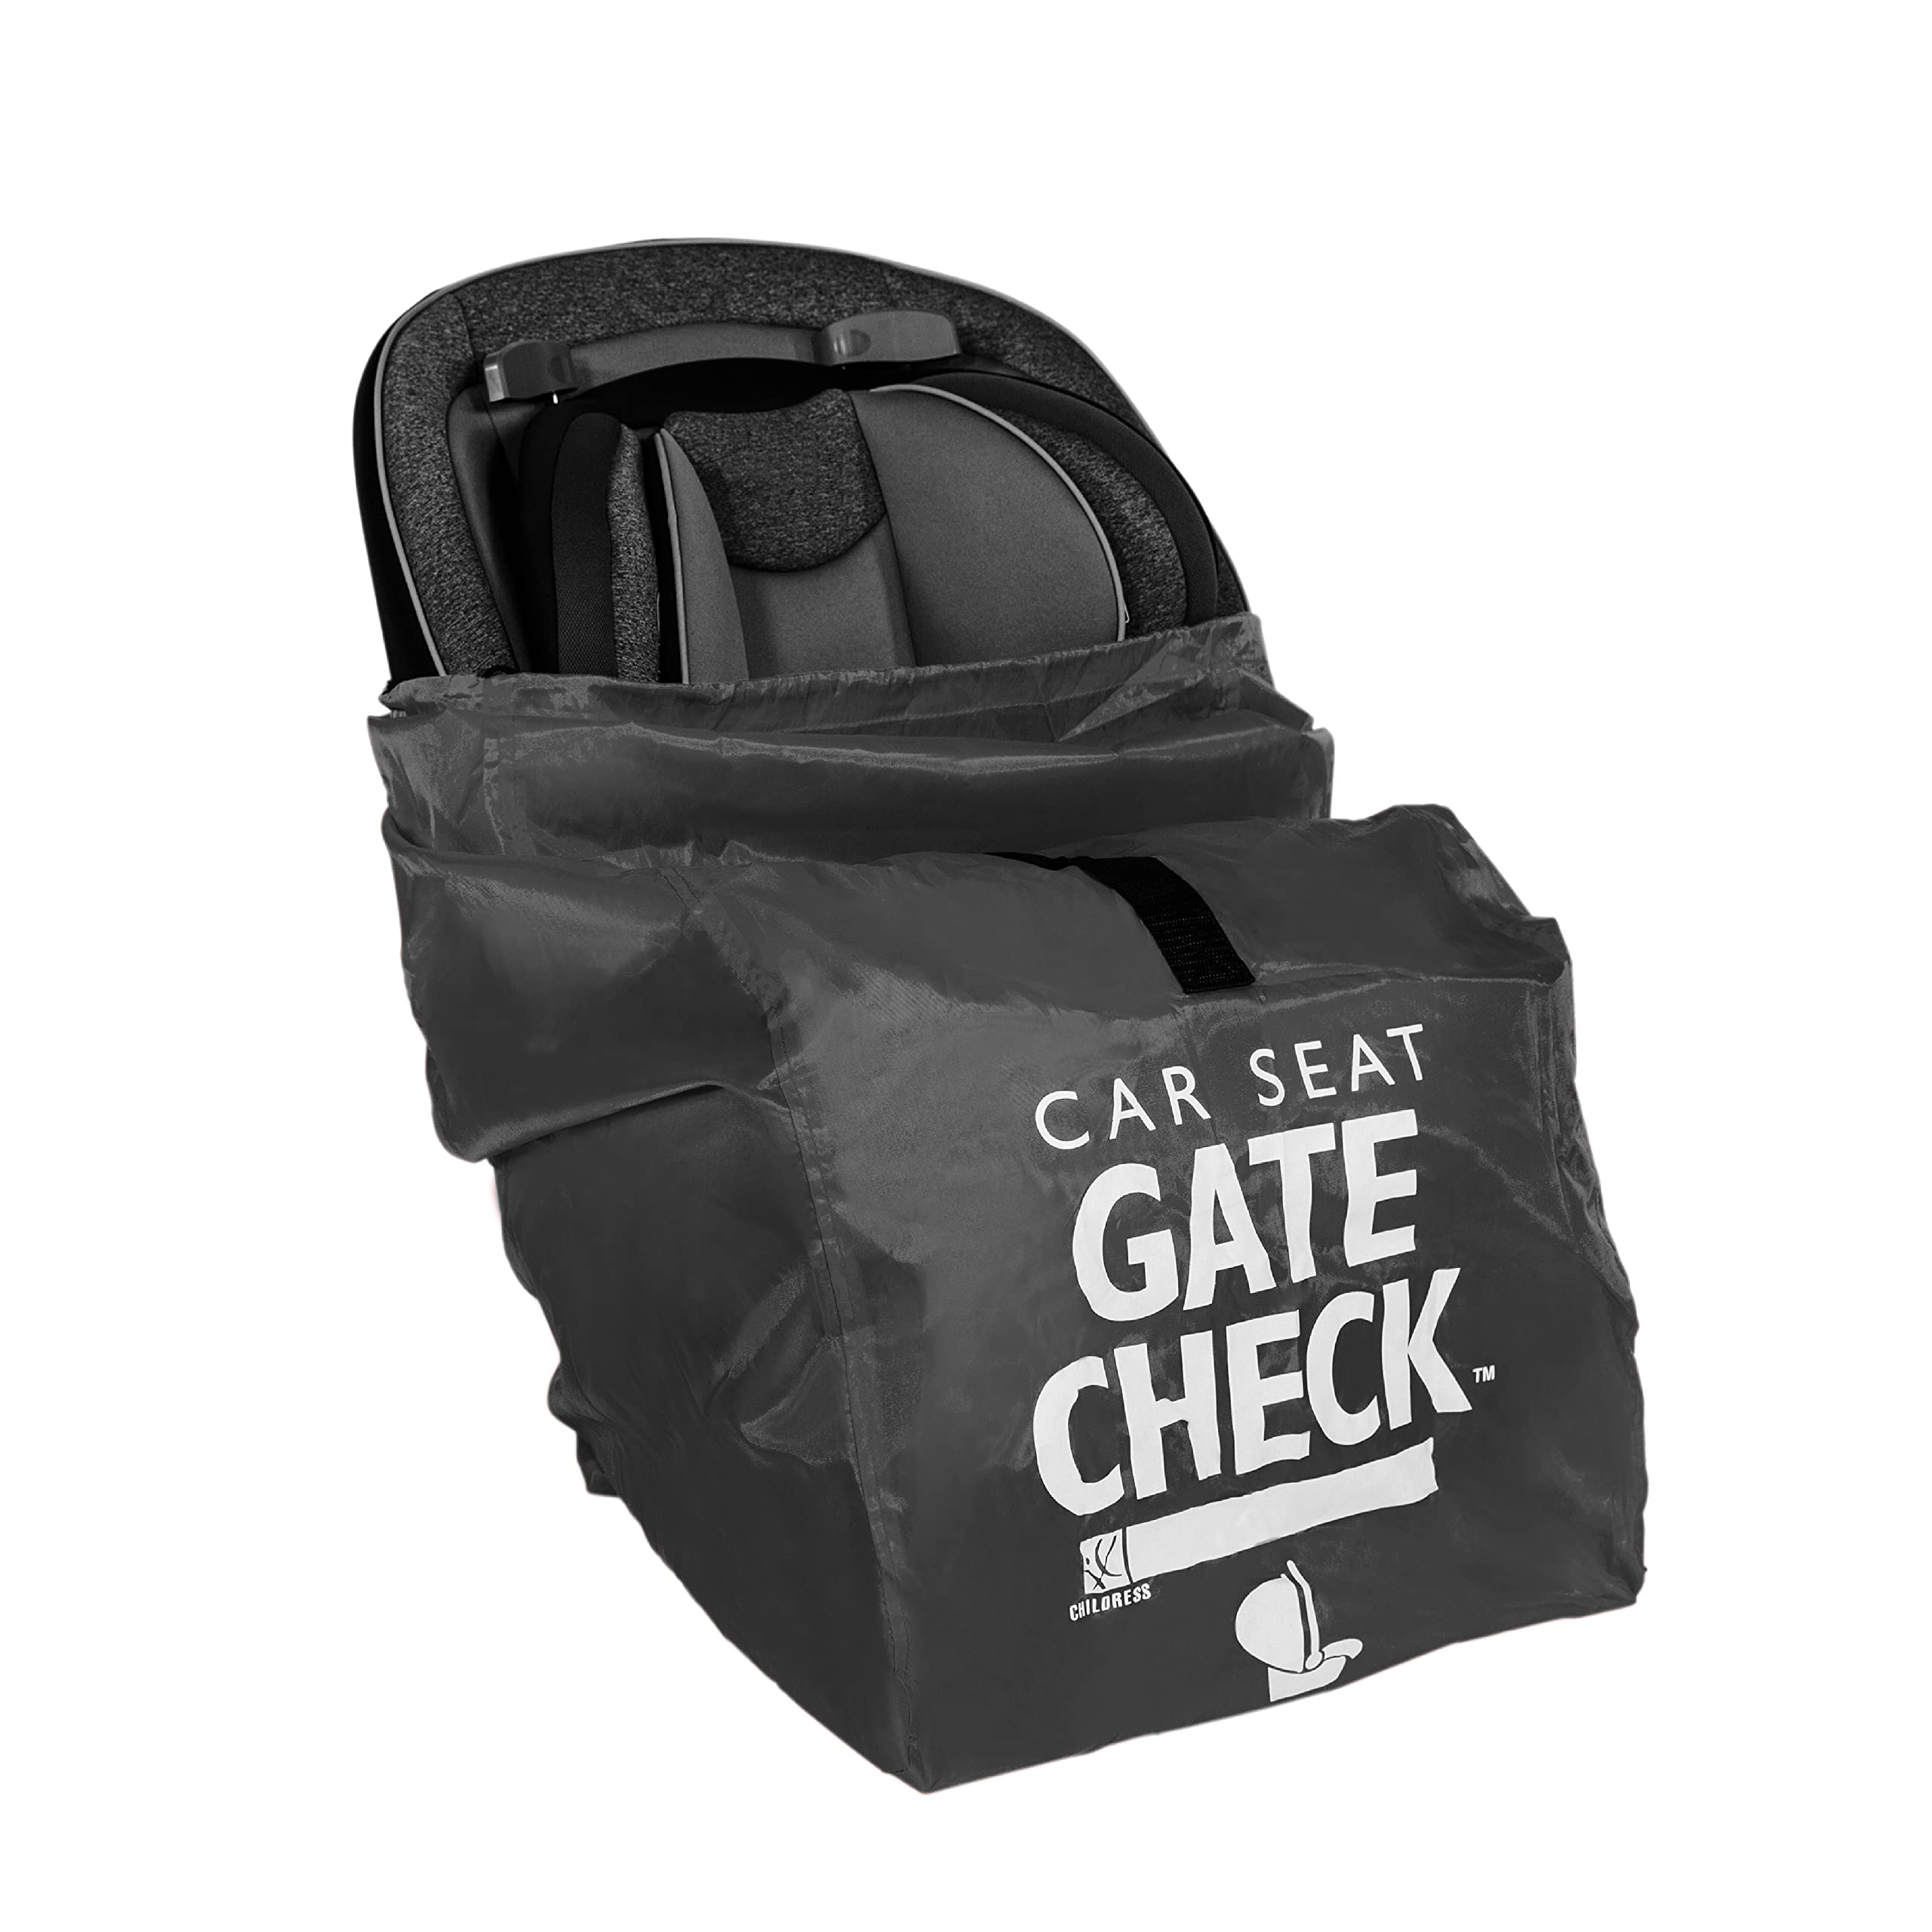 J.L. Childress Gate Check Bag for Car Seats - Air Travel Fits Convertible Seats, Infant Carriers & Booster Black